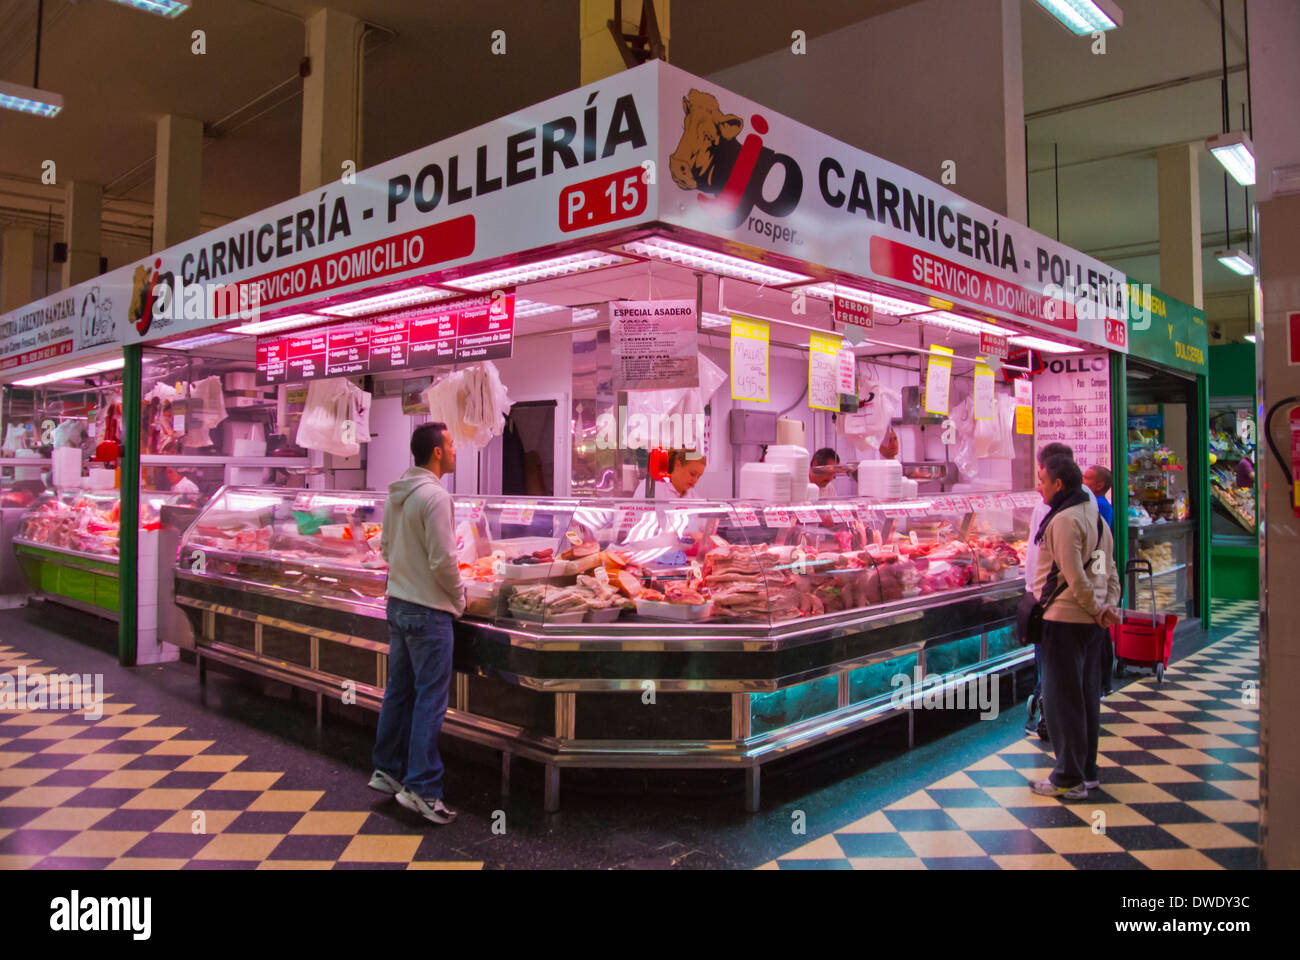 Meat and chicken stall, Mercado Central market hall, Las Palmas de Gran Canaria, the Canary Islands, Spain, Europe Stock Photo